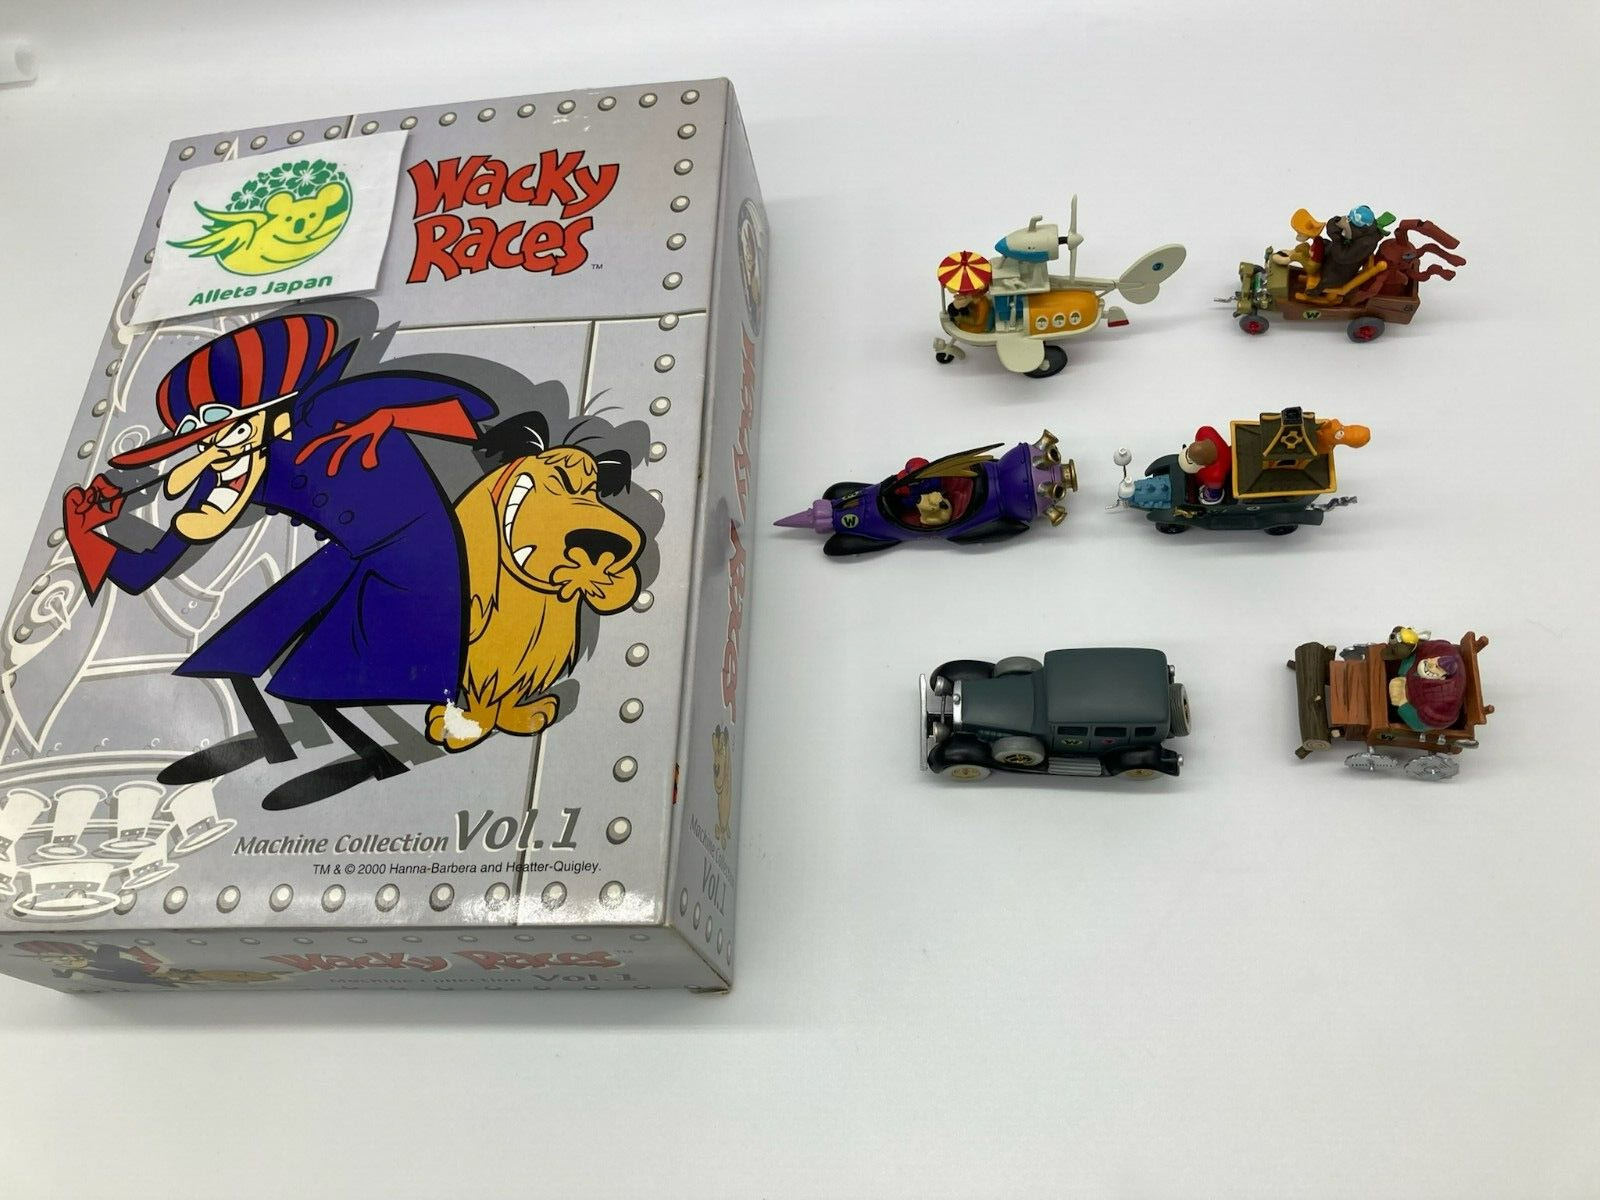 Kensin Wacky Races Vol.1 Mean Machine Collection Hanna Barbera Toy 6 Car vehicle